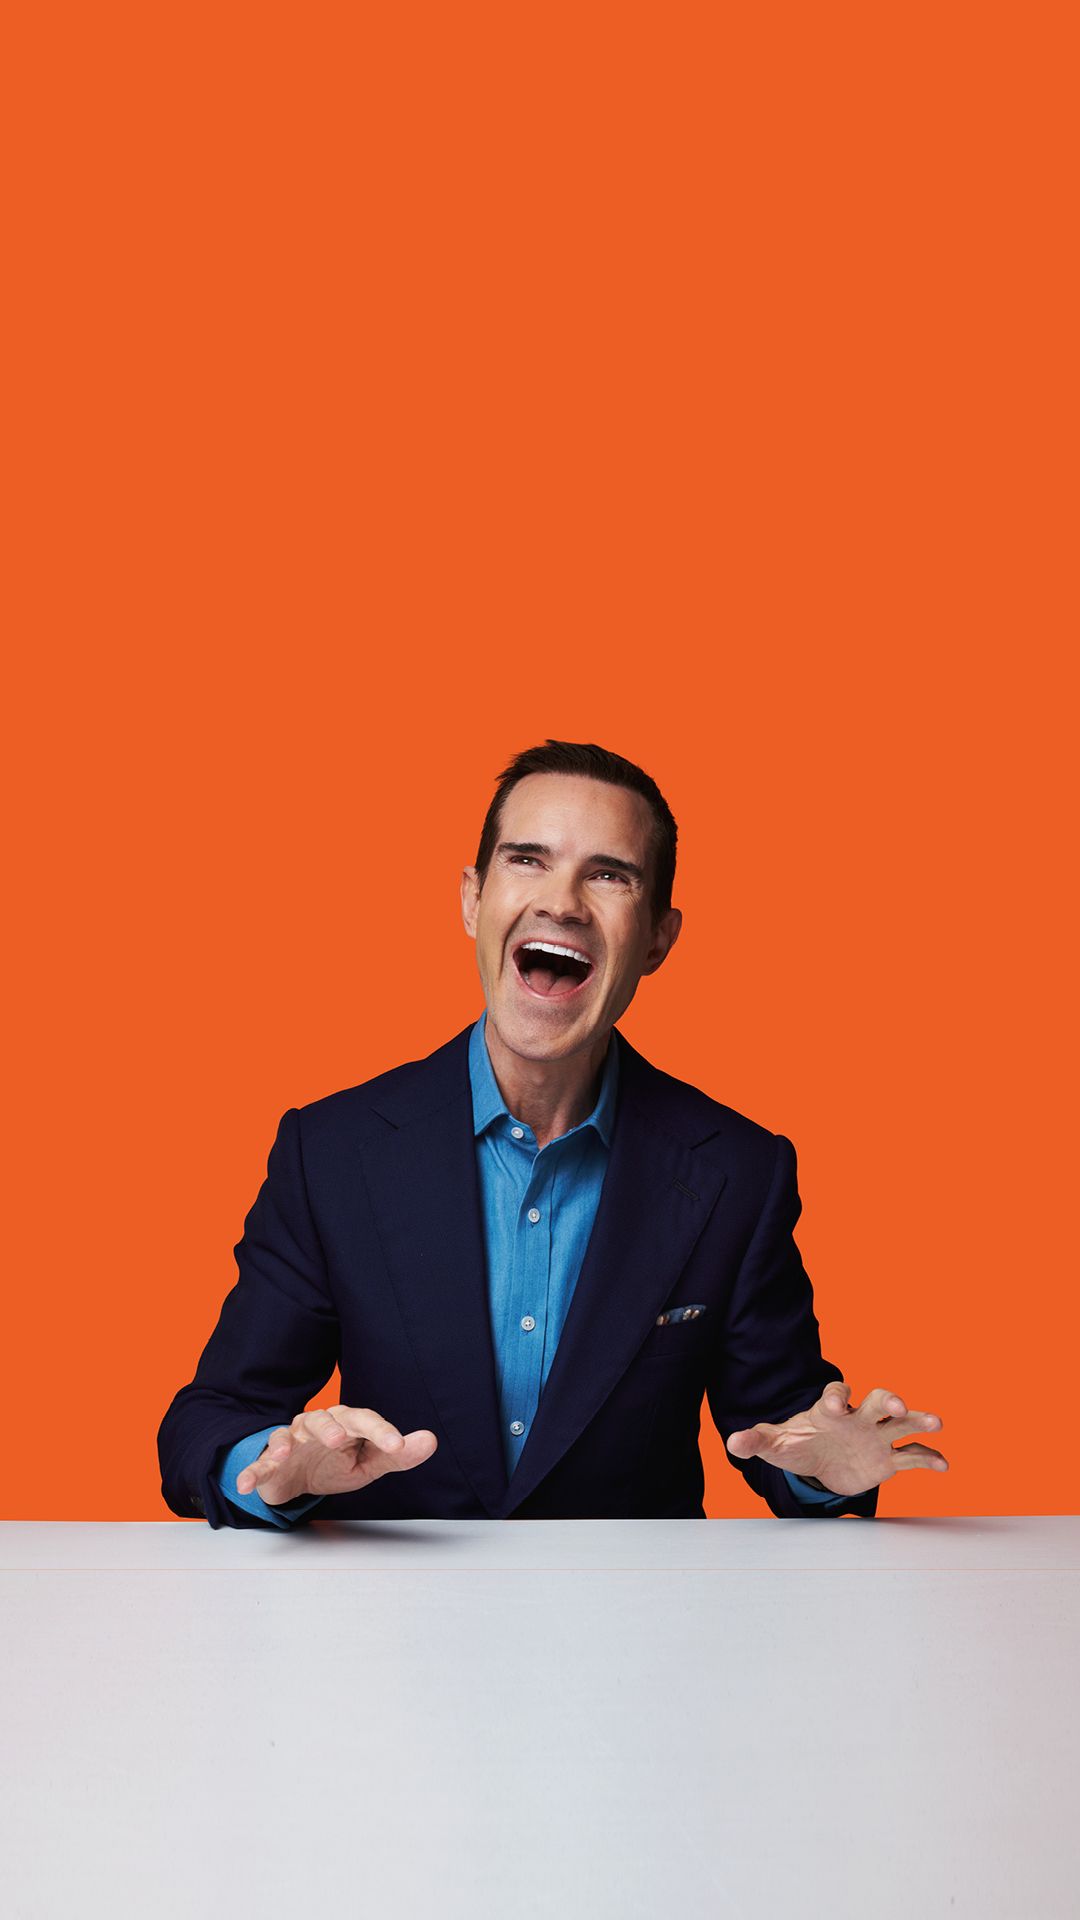 JIMMY CARR: LAUGHS FUNNY
NEW LIVE TOUR FOR 2024-2025

Extra Shows In Wexford Confirmed
Tickets On Sa